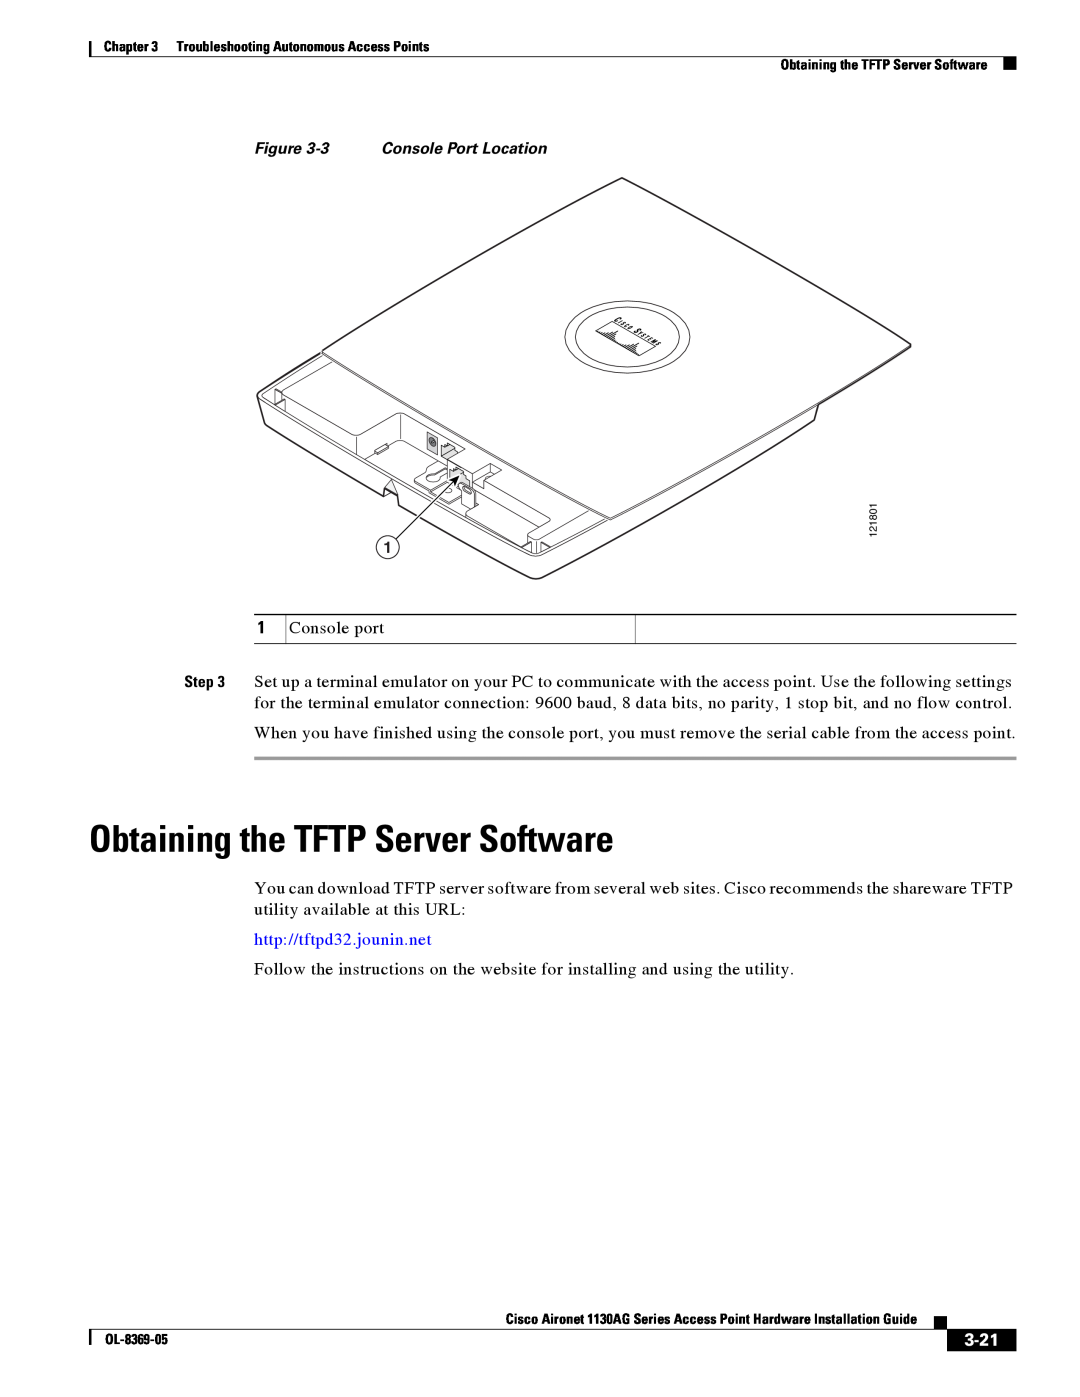 Cisco Systems 1130AG manual Obtaining the TFTP Server Software, 3-21 